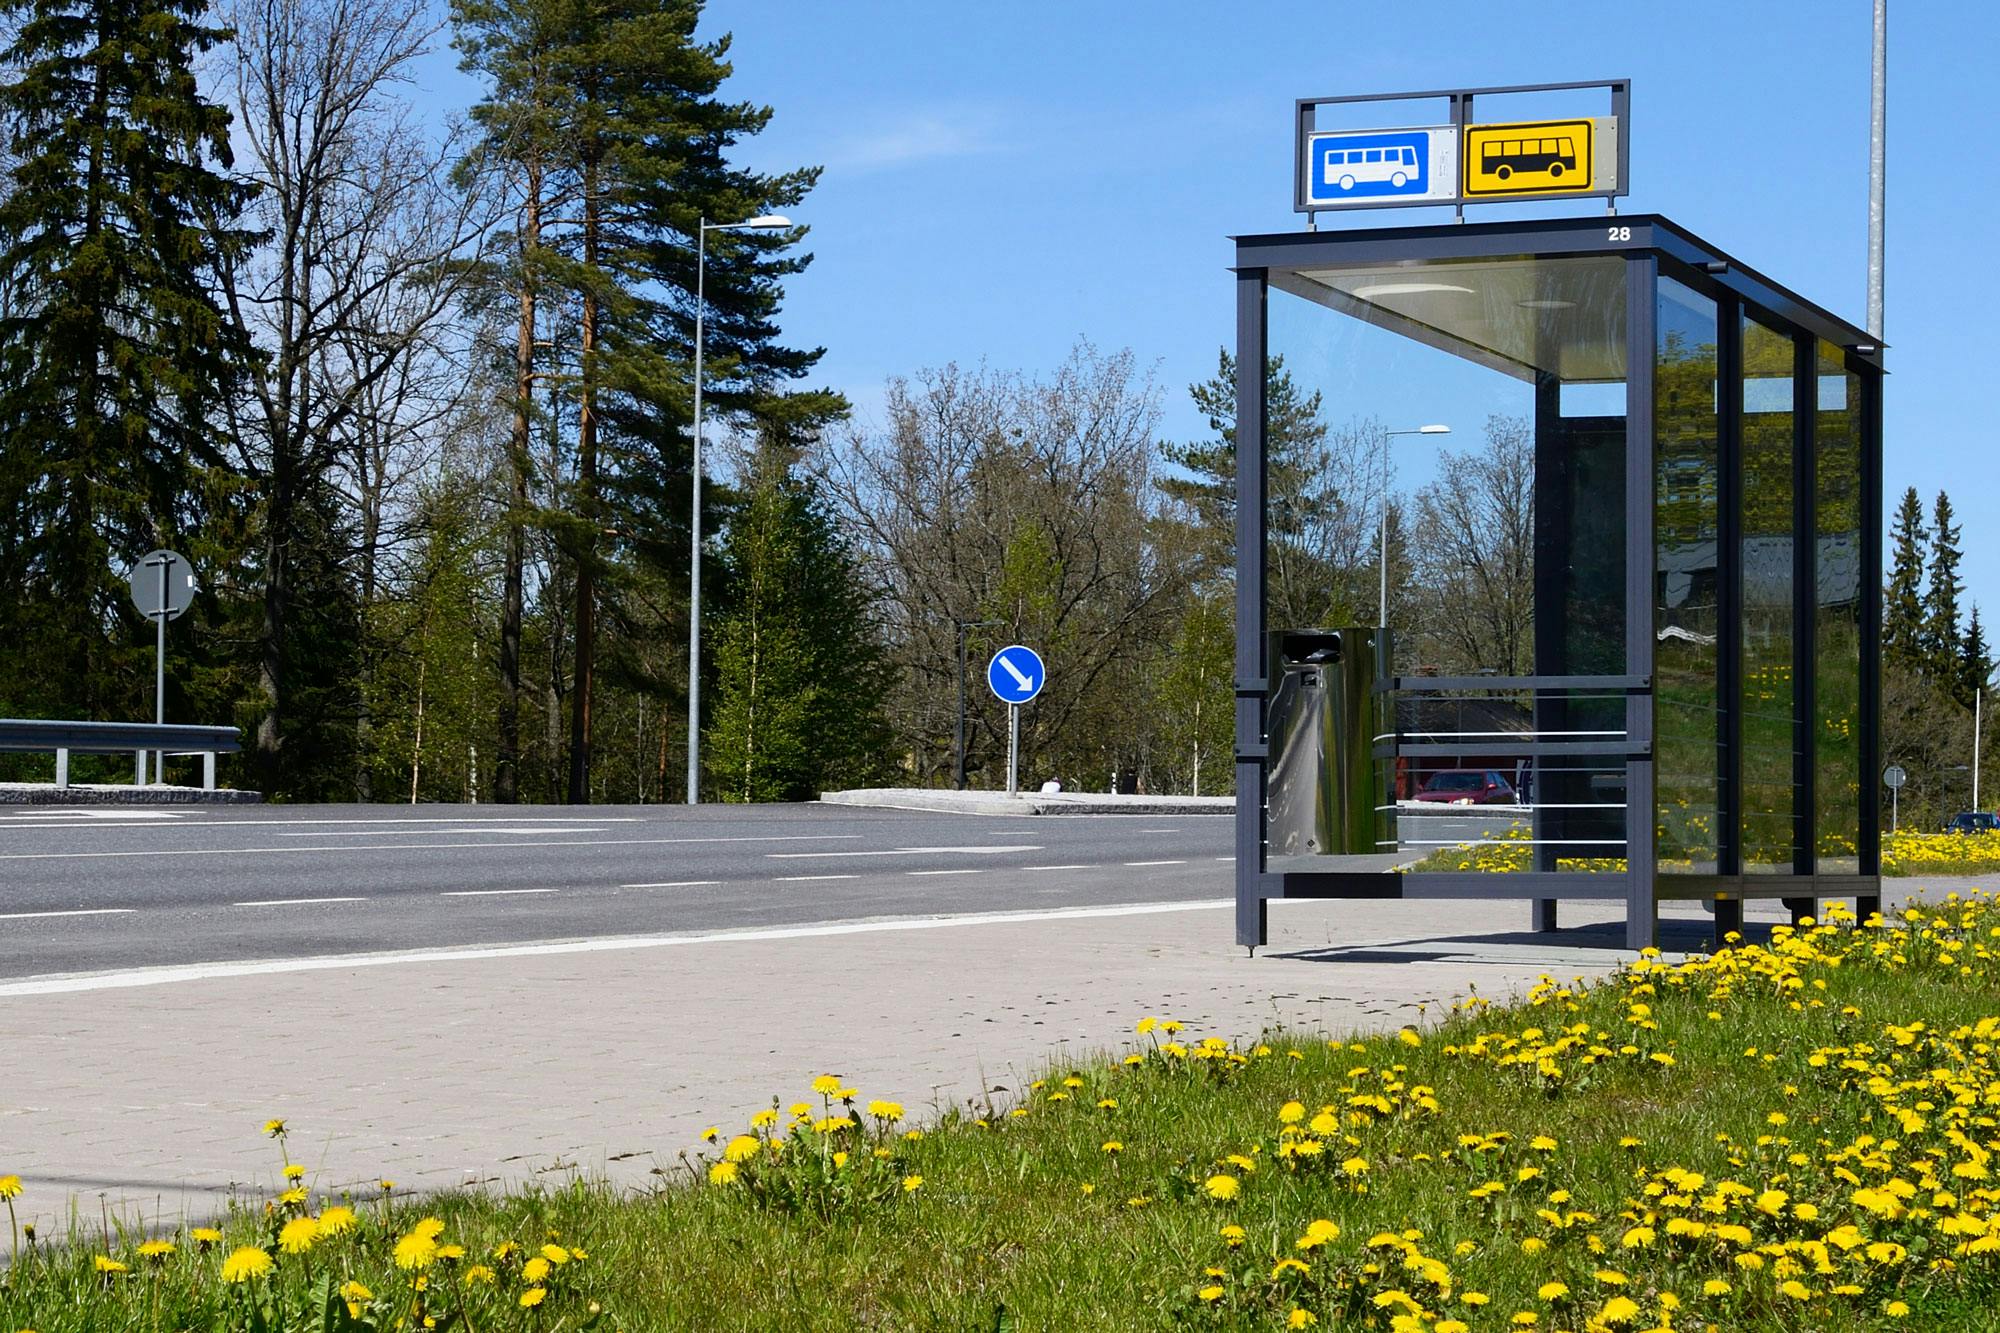 A bus stop somewhere in Finland